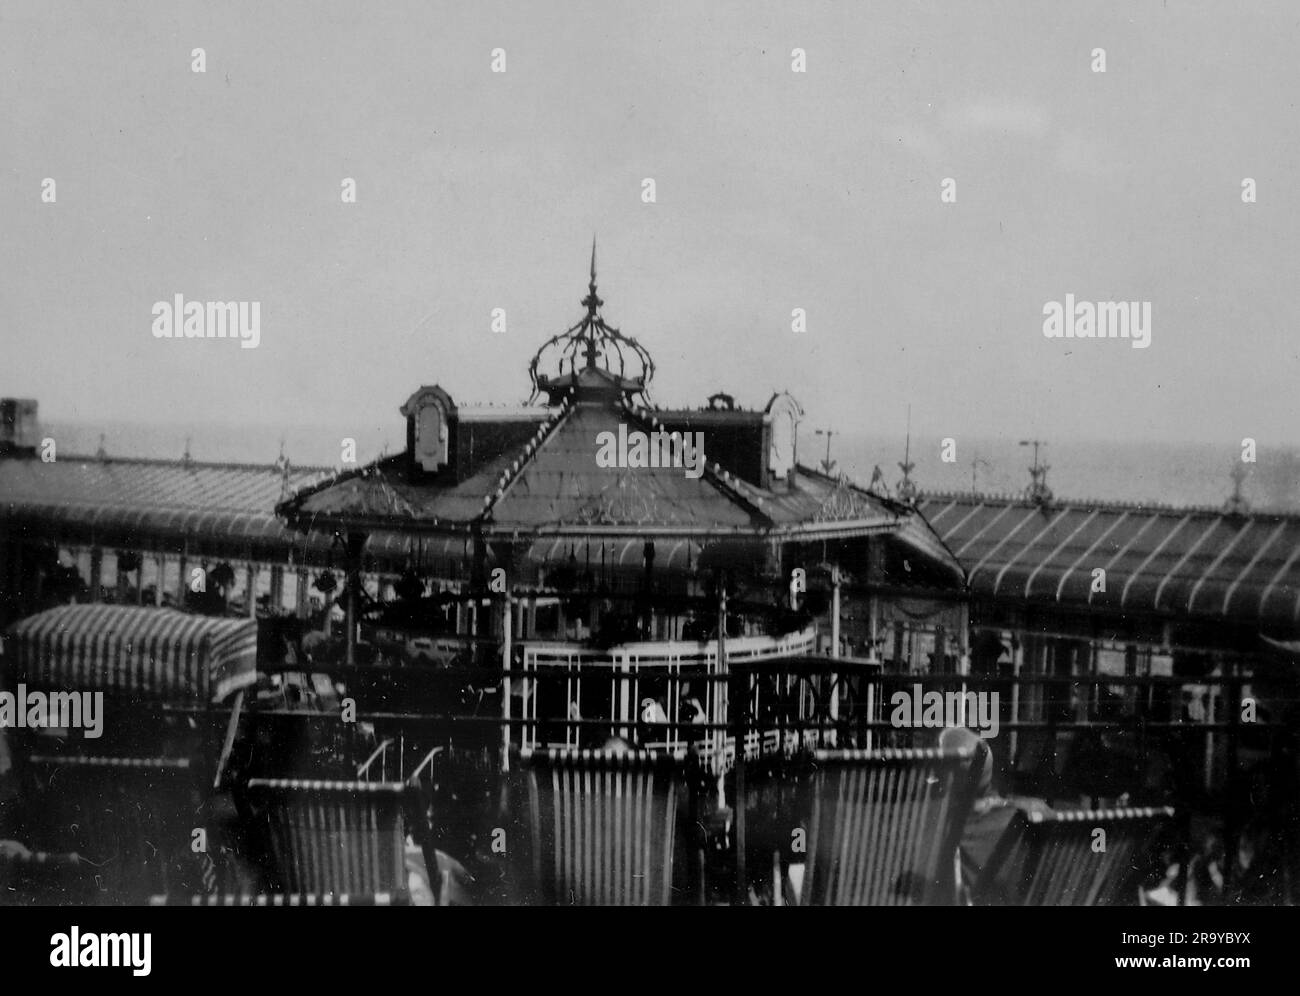 The bandstand, Clacton Pavilion. Photo from a family album of snapshot images mainly taken in the UK, during the 1920s. The family lived in Witley, Surrey, and had some links to the military. Stock Photo